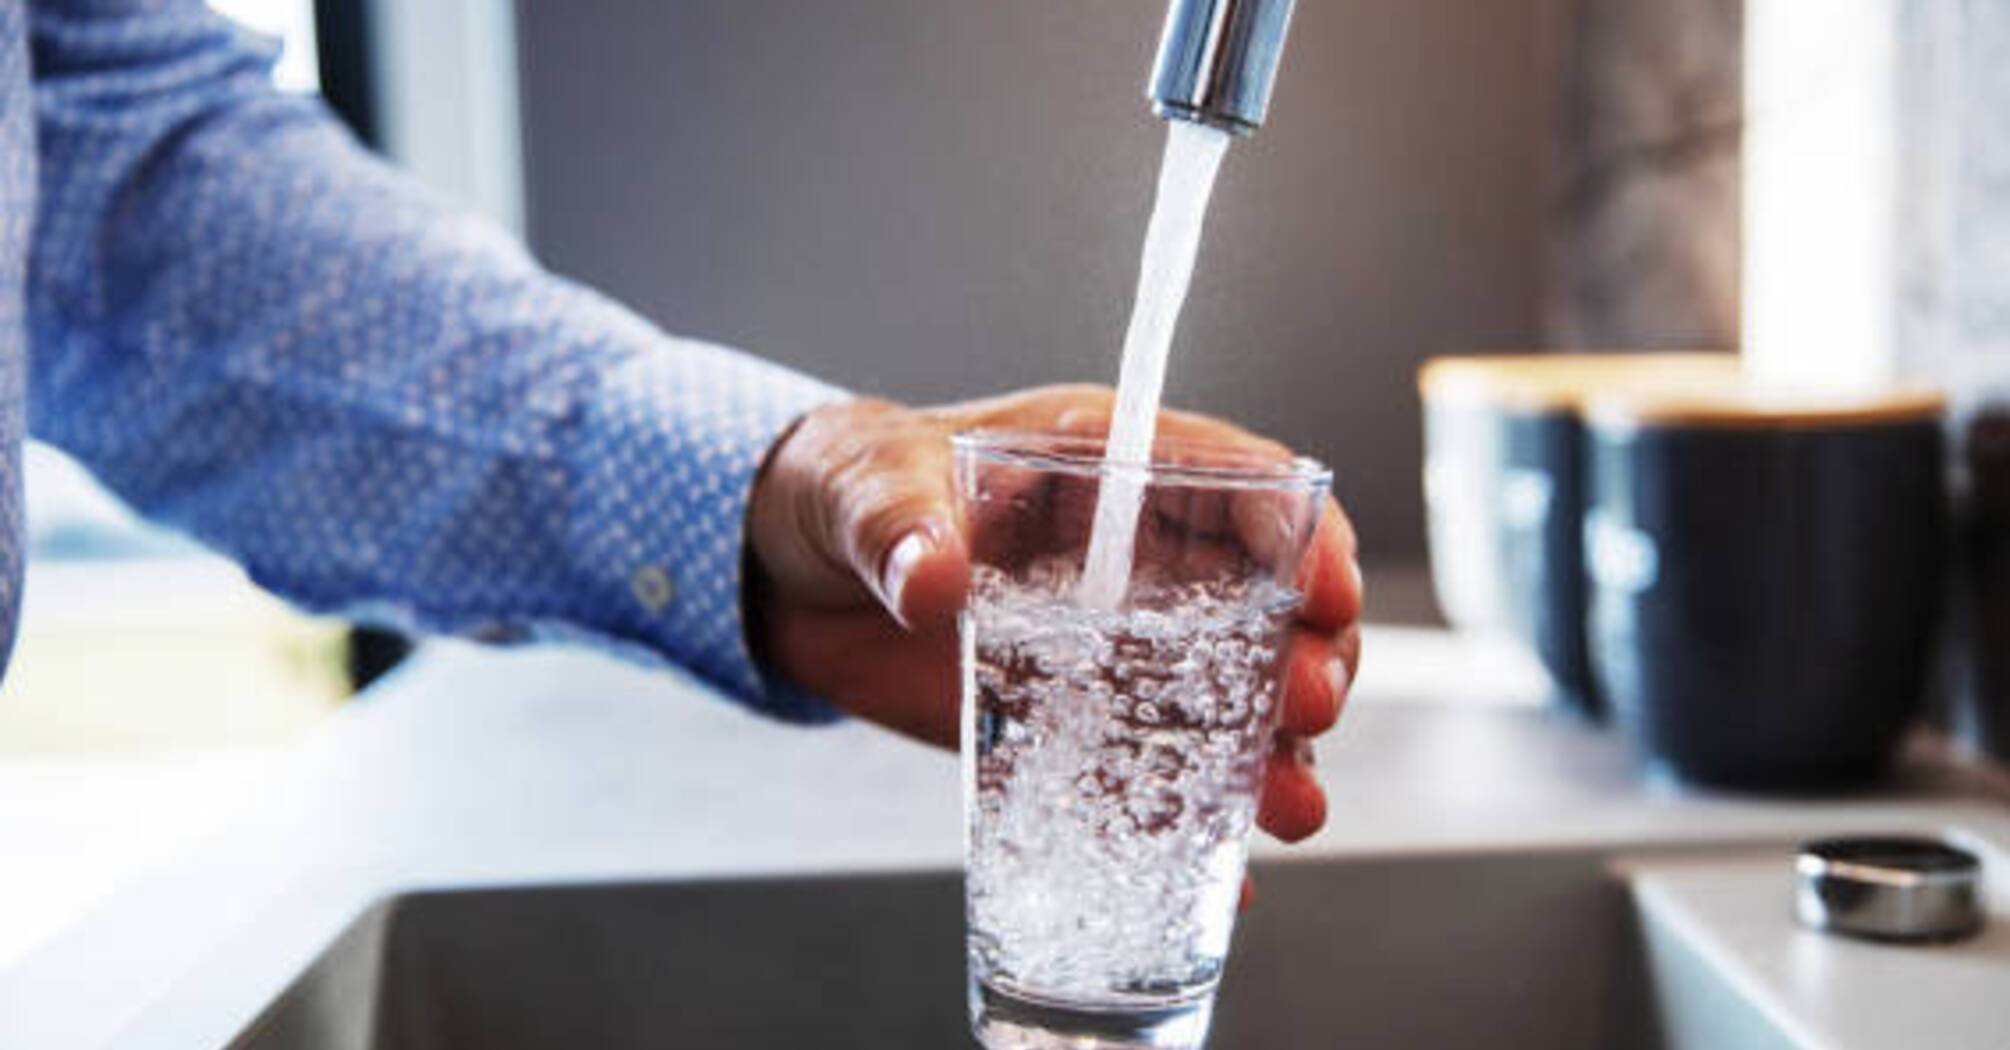 How to check the quality of tap water: 5 useful tips